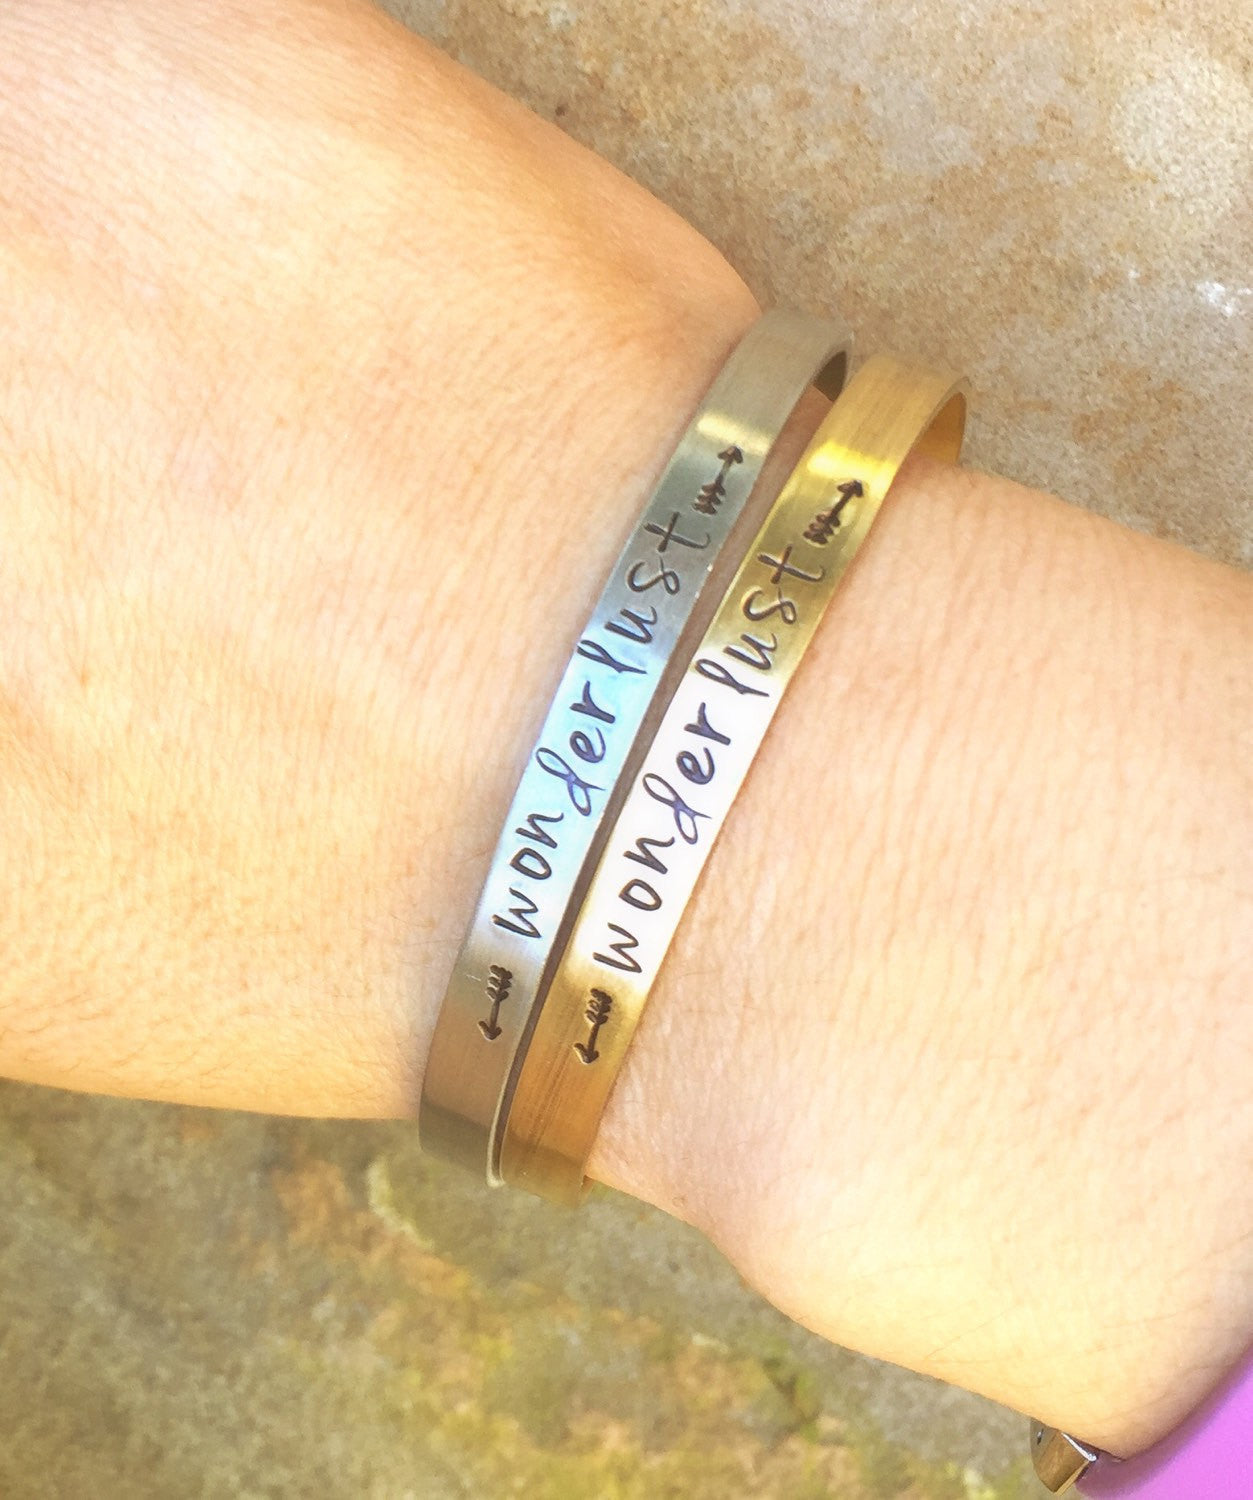 Wanderlust Cuff, Inspirational Jewelry,  Personalized Skinny Bracelet, Hand Stamped Message Bracelet, Skinny Cuffs, natashaaloha - Natashaaloha, jewelry, bracelets, necklace, keychains, fishing lures, gifts for men, charms, personalized, 